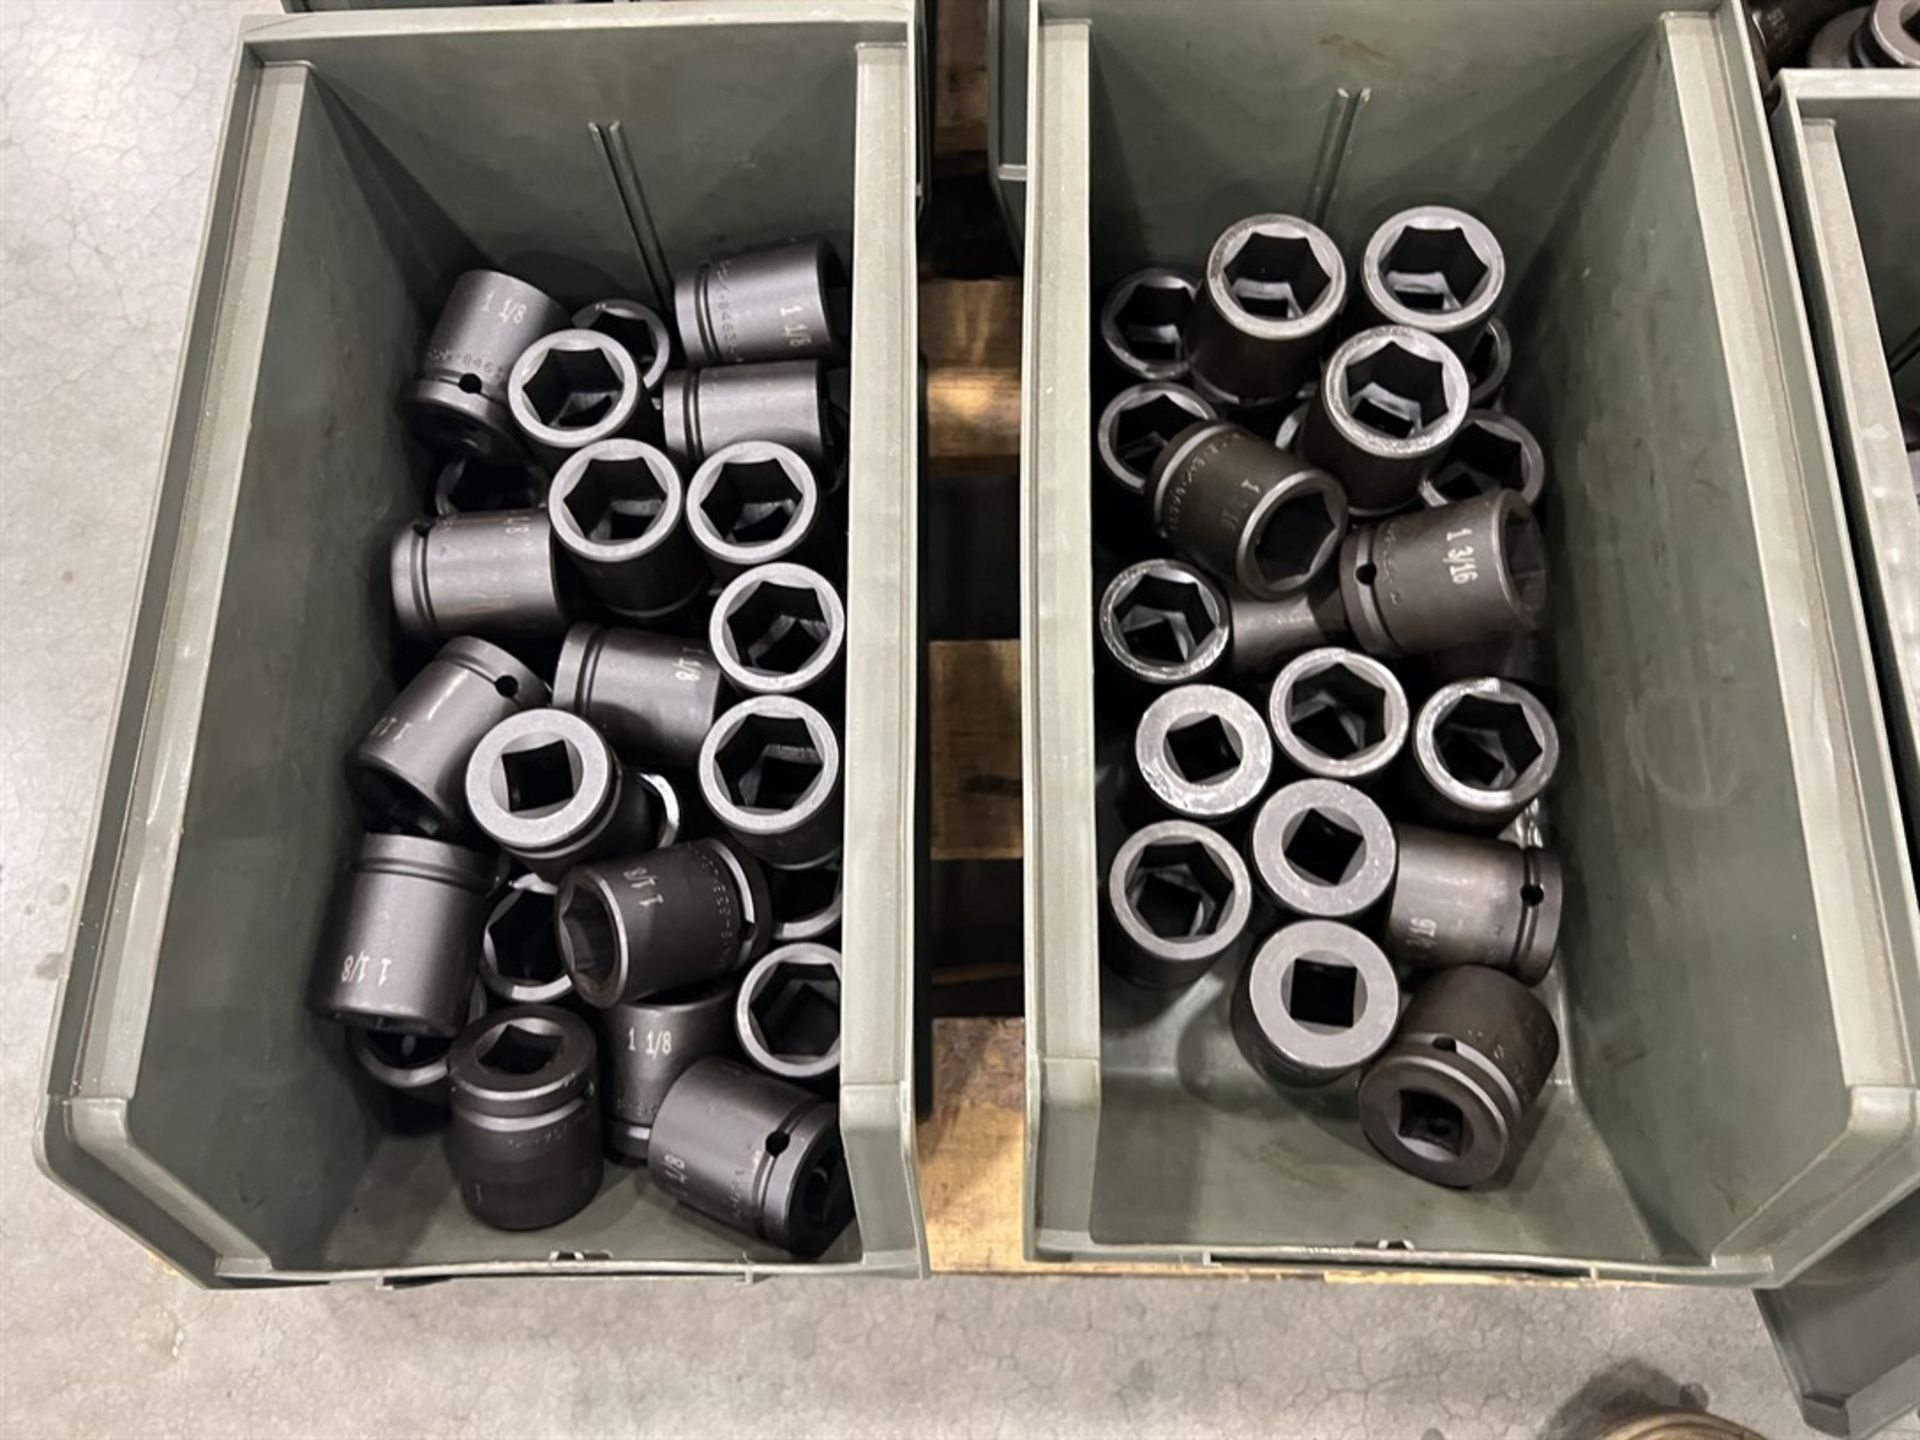 Pallet of 3/4" Drive Impact Sockets up to 38mm and 1-15/16" - Image 3 of 8